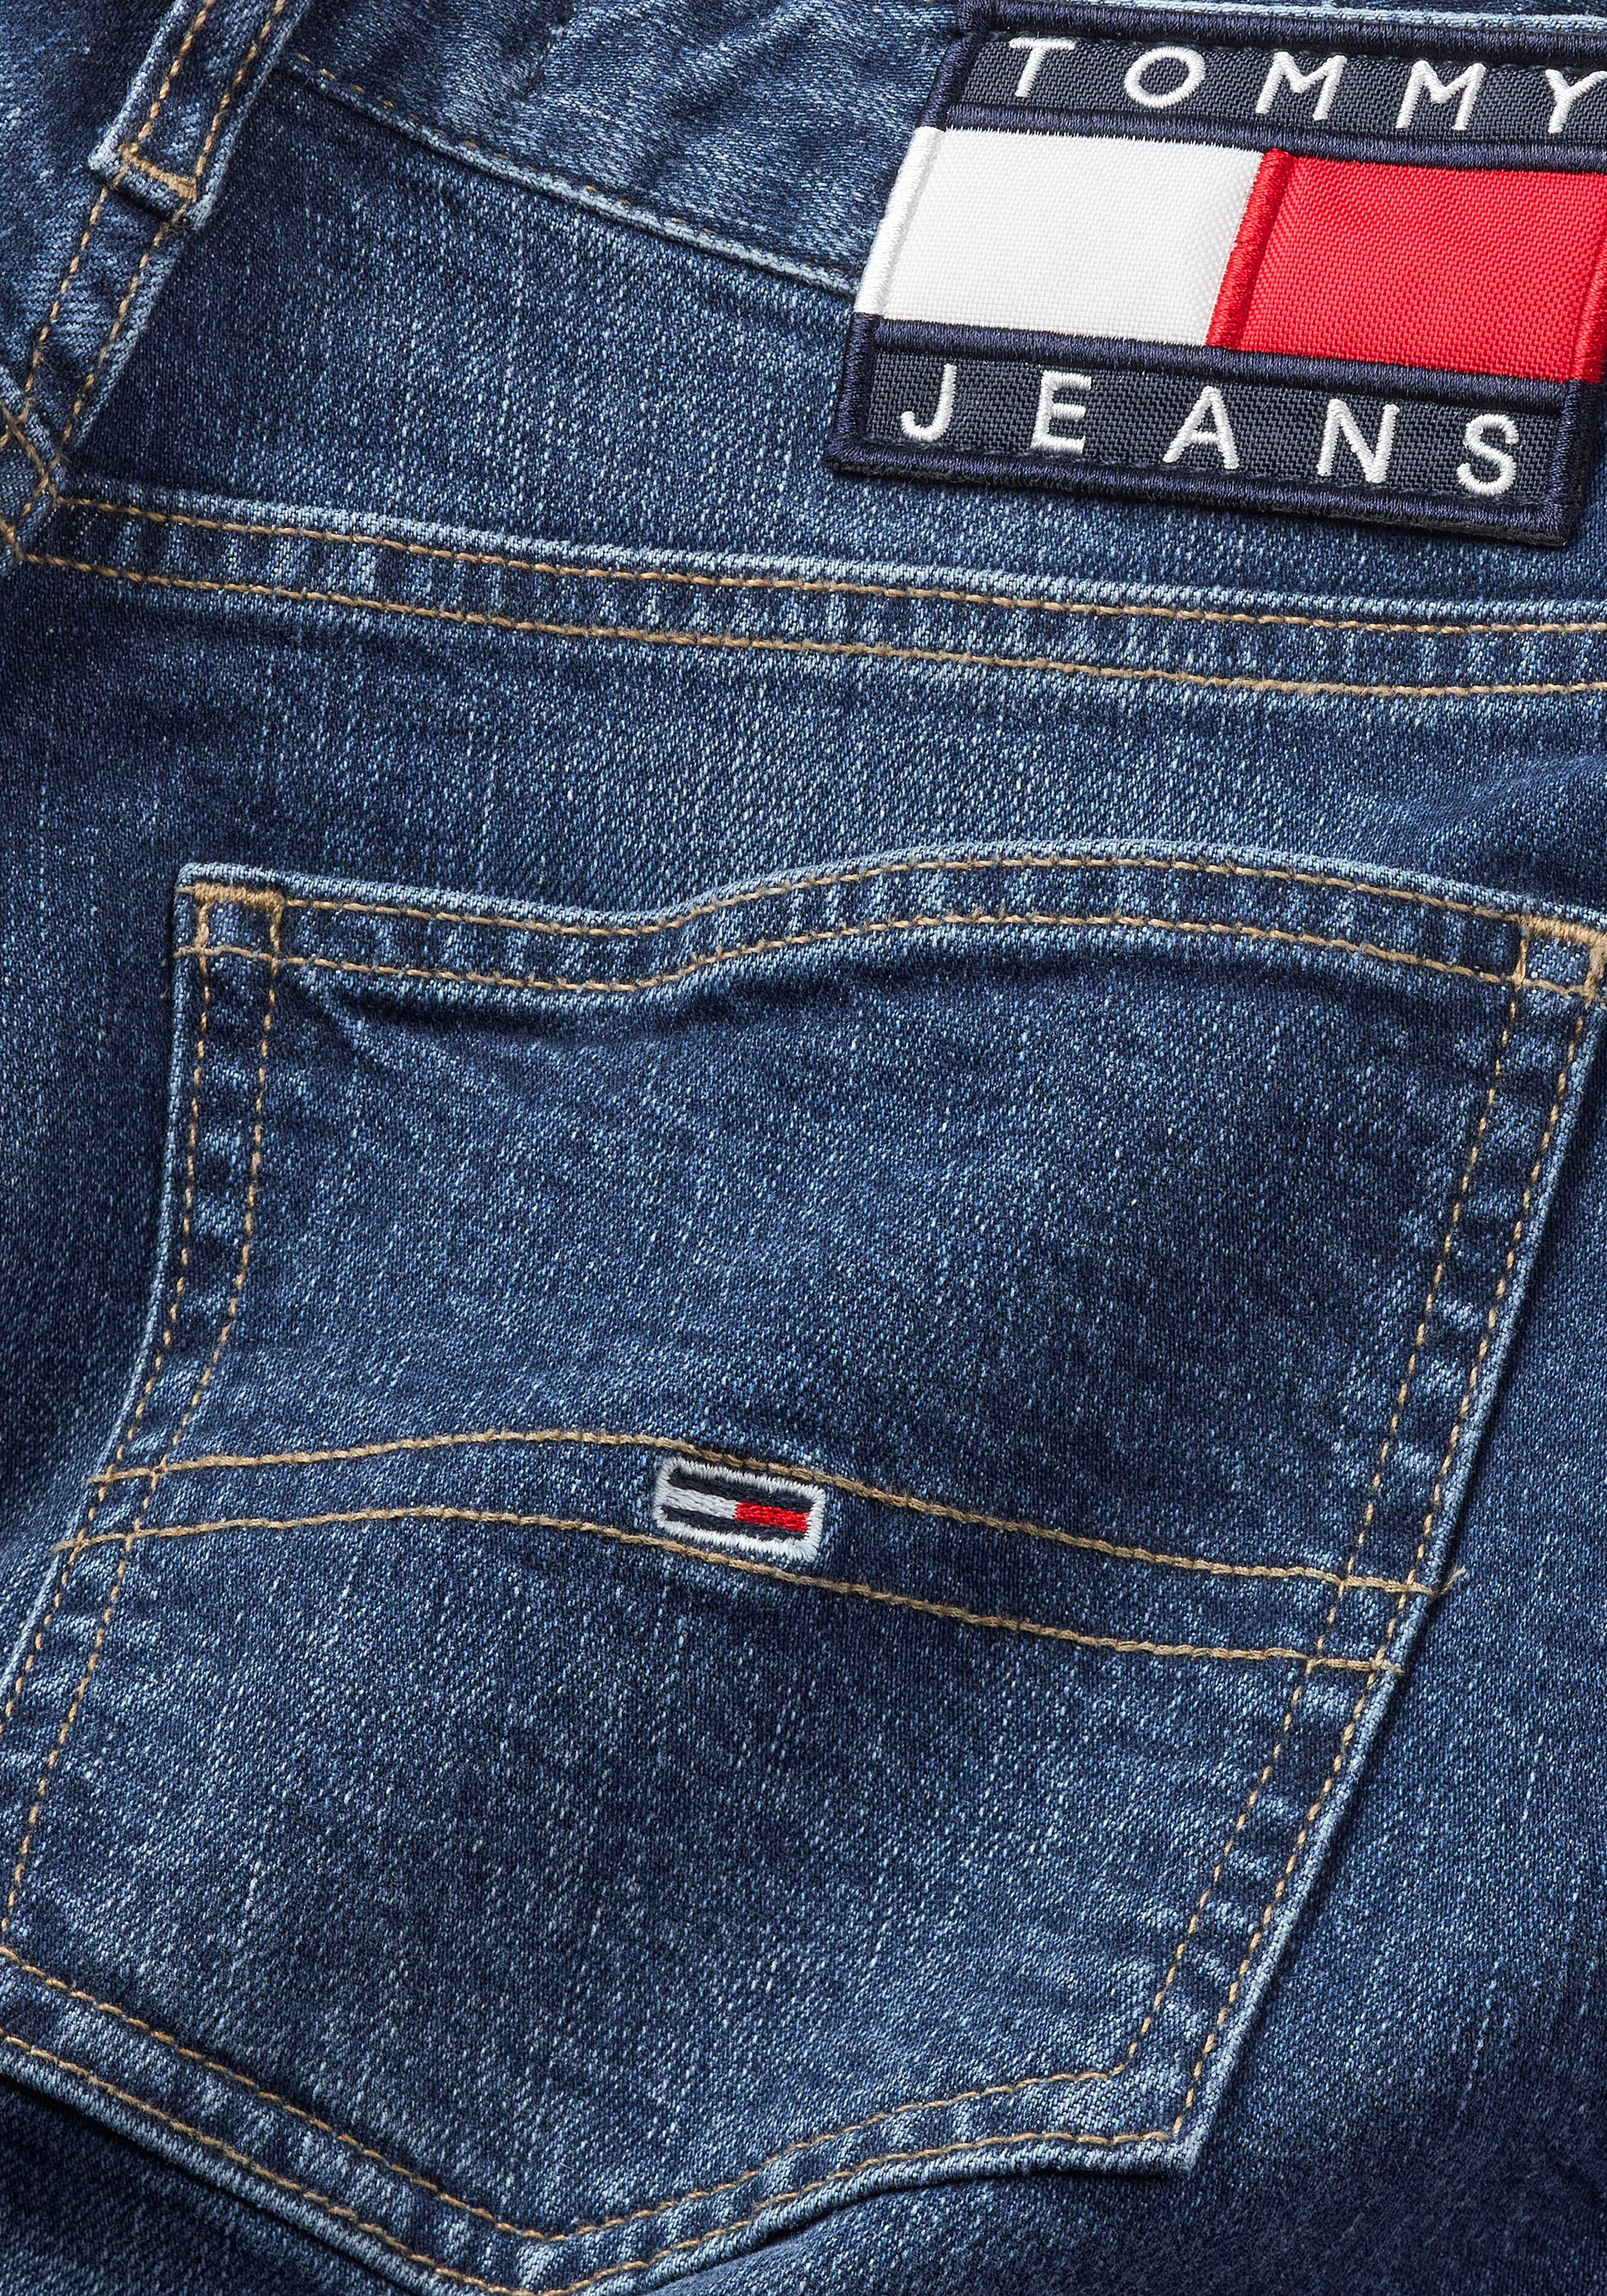 Tommy Jeans Slim-fit-Jeans CG4139«, ANK mit Tommy bei OTTOversand »IZZIE SL Logo-Badge HR